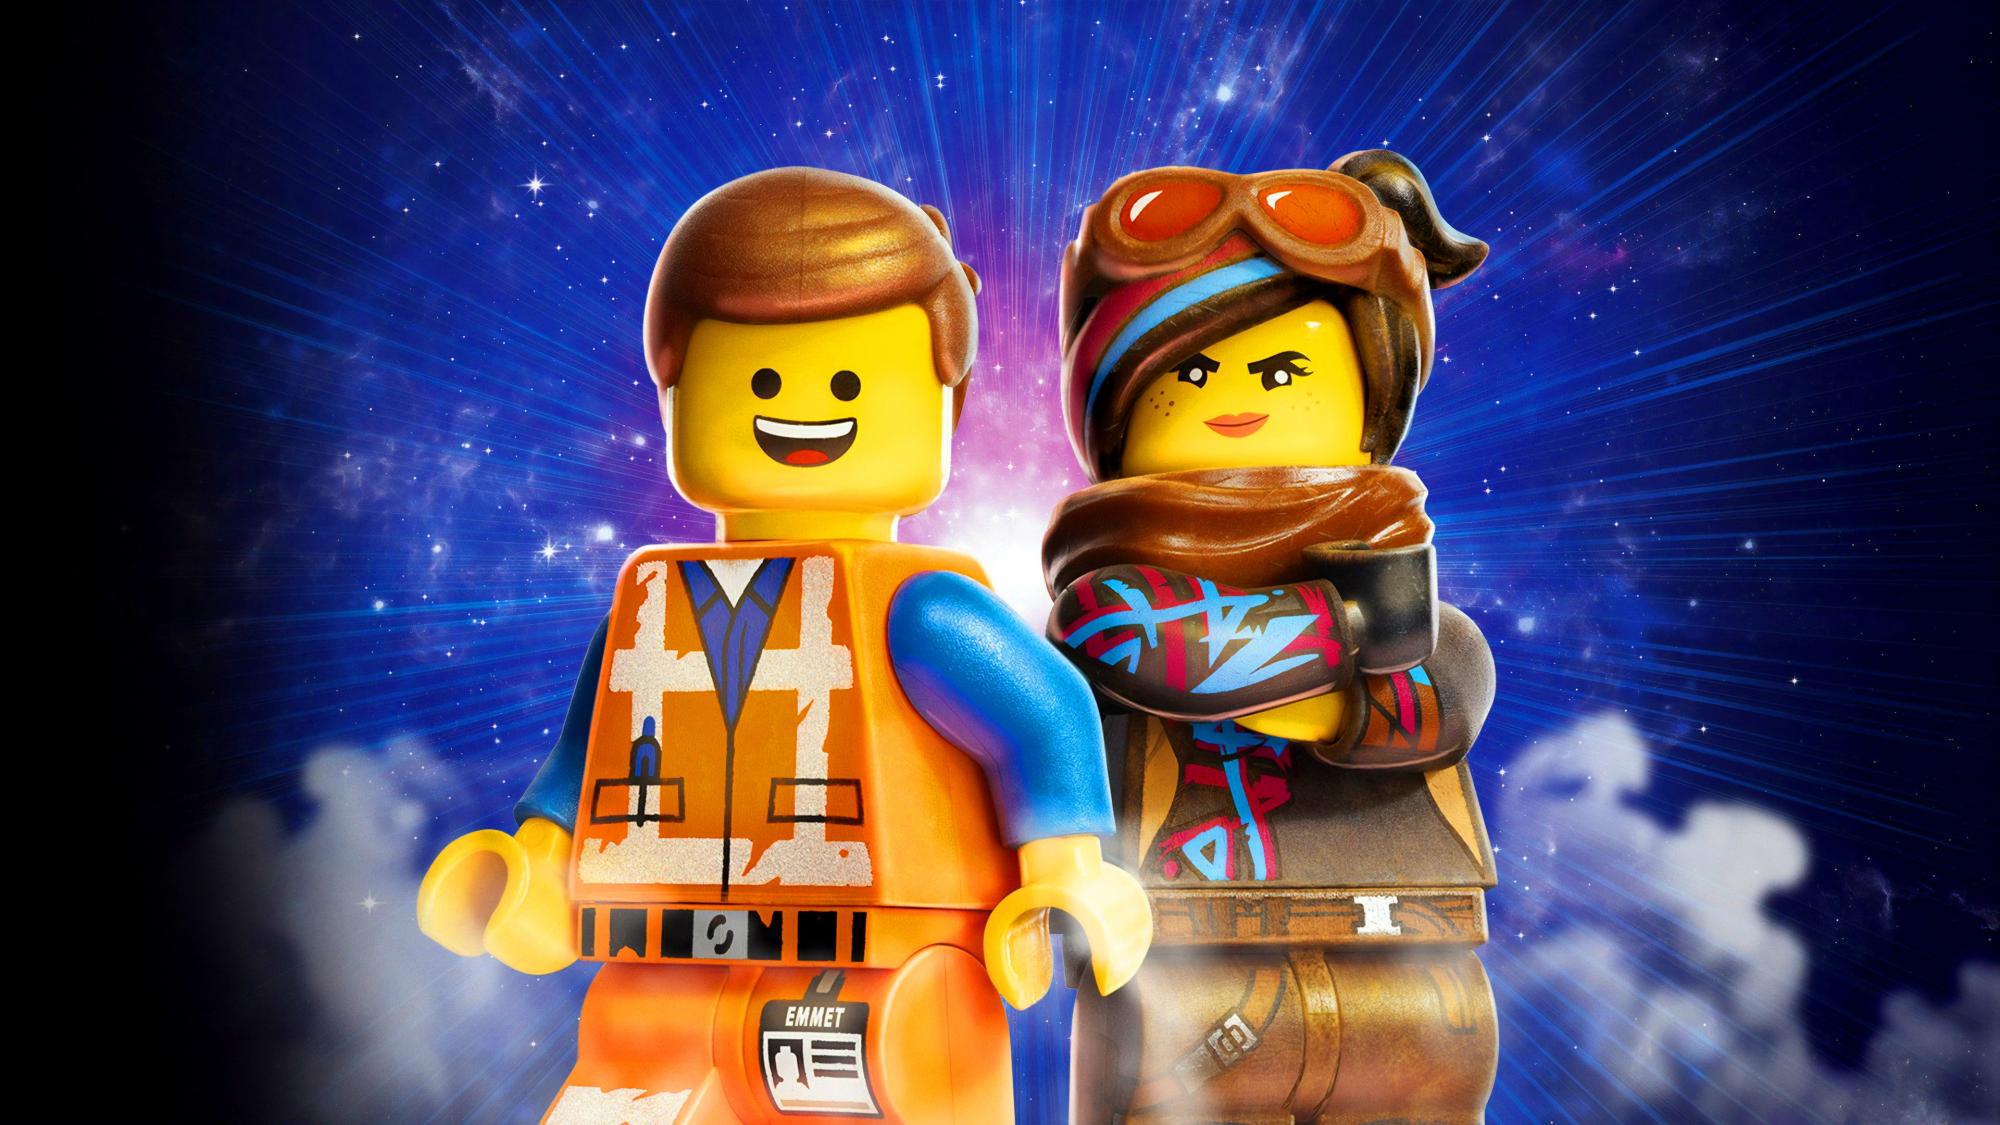 Backdrop Image for The Lego Movie 2: The Second Part